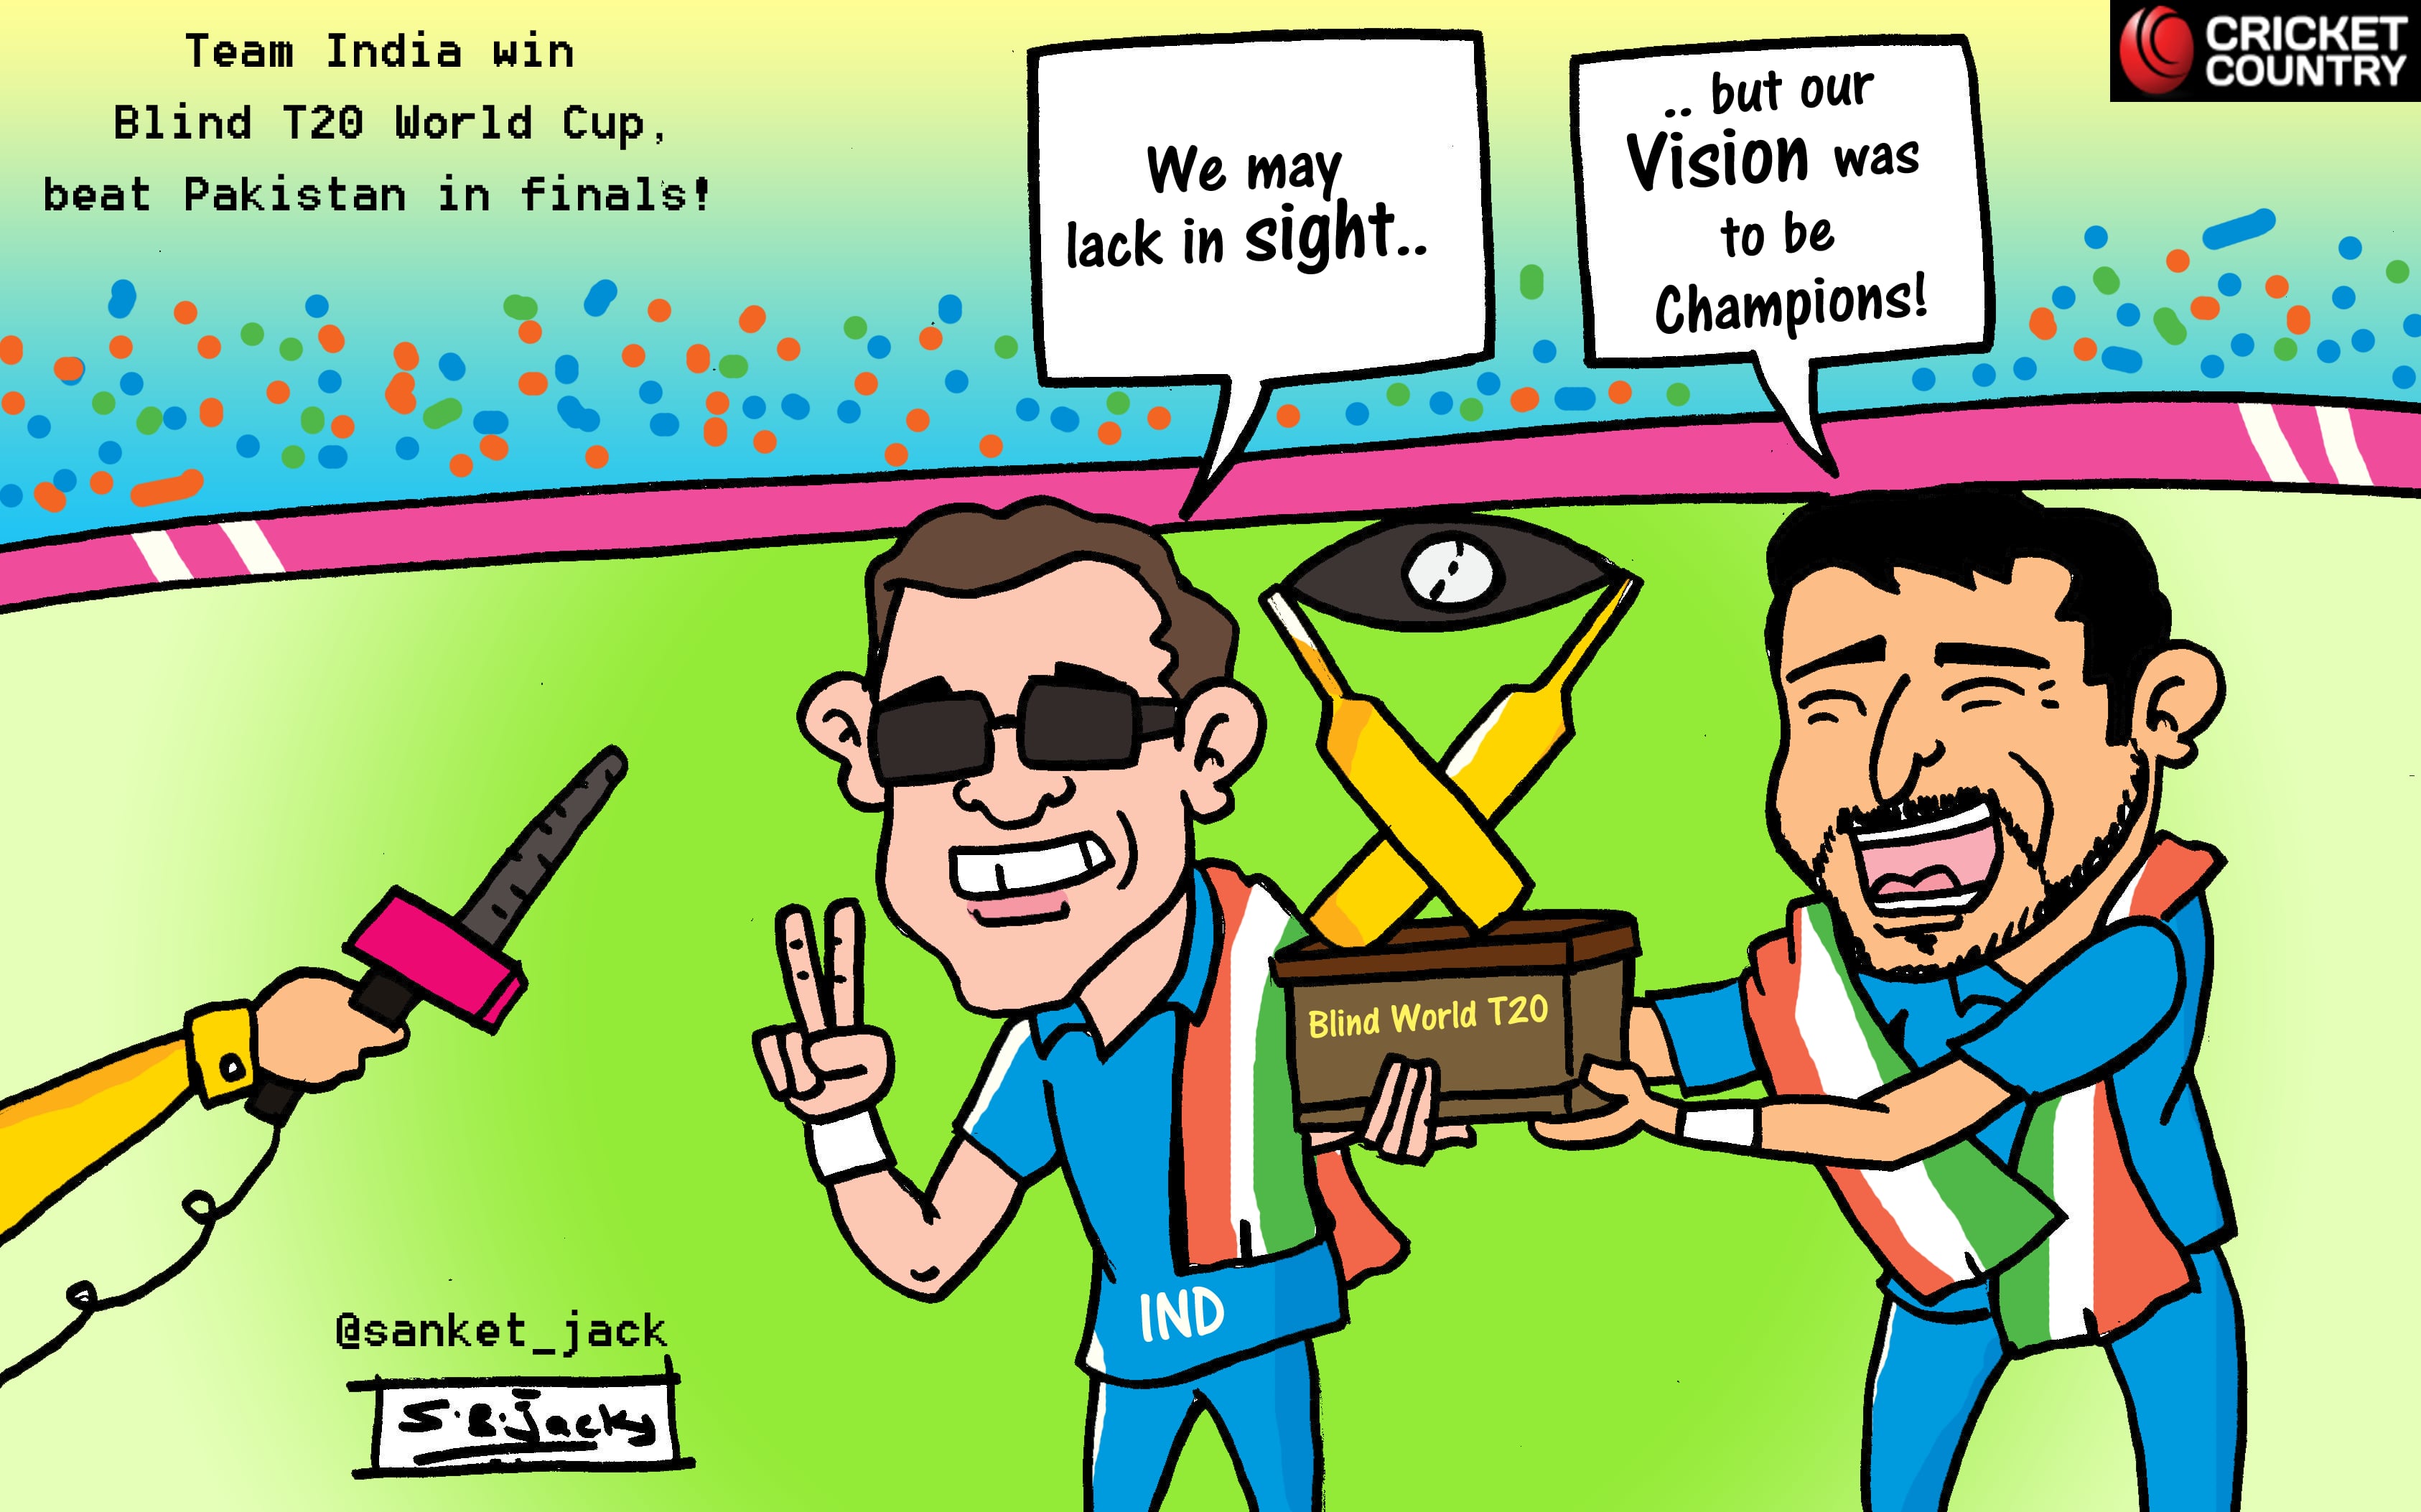 Cartoon India Wins Blind World T20 Cricket Country